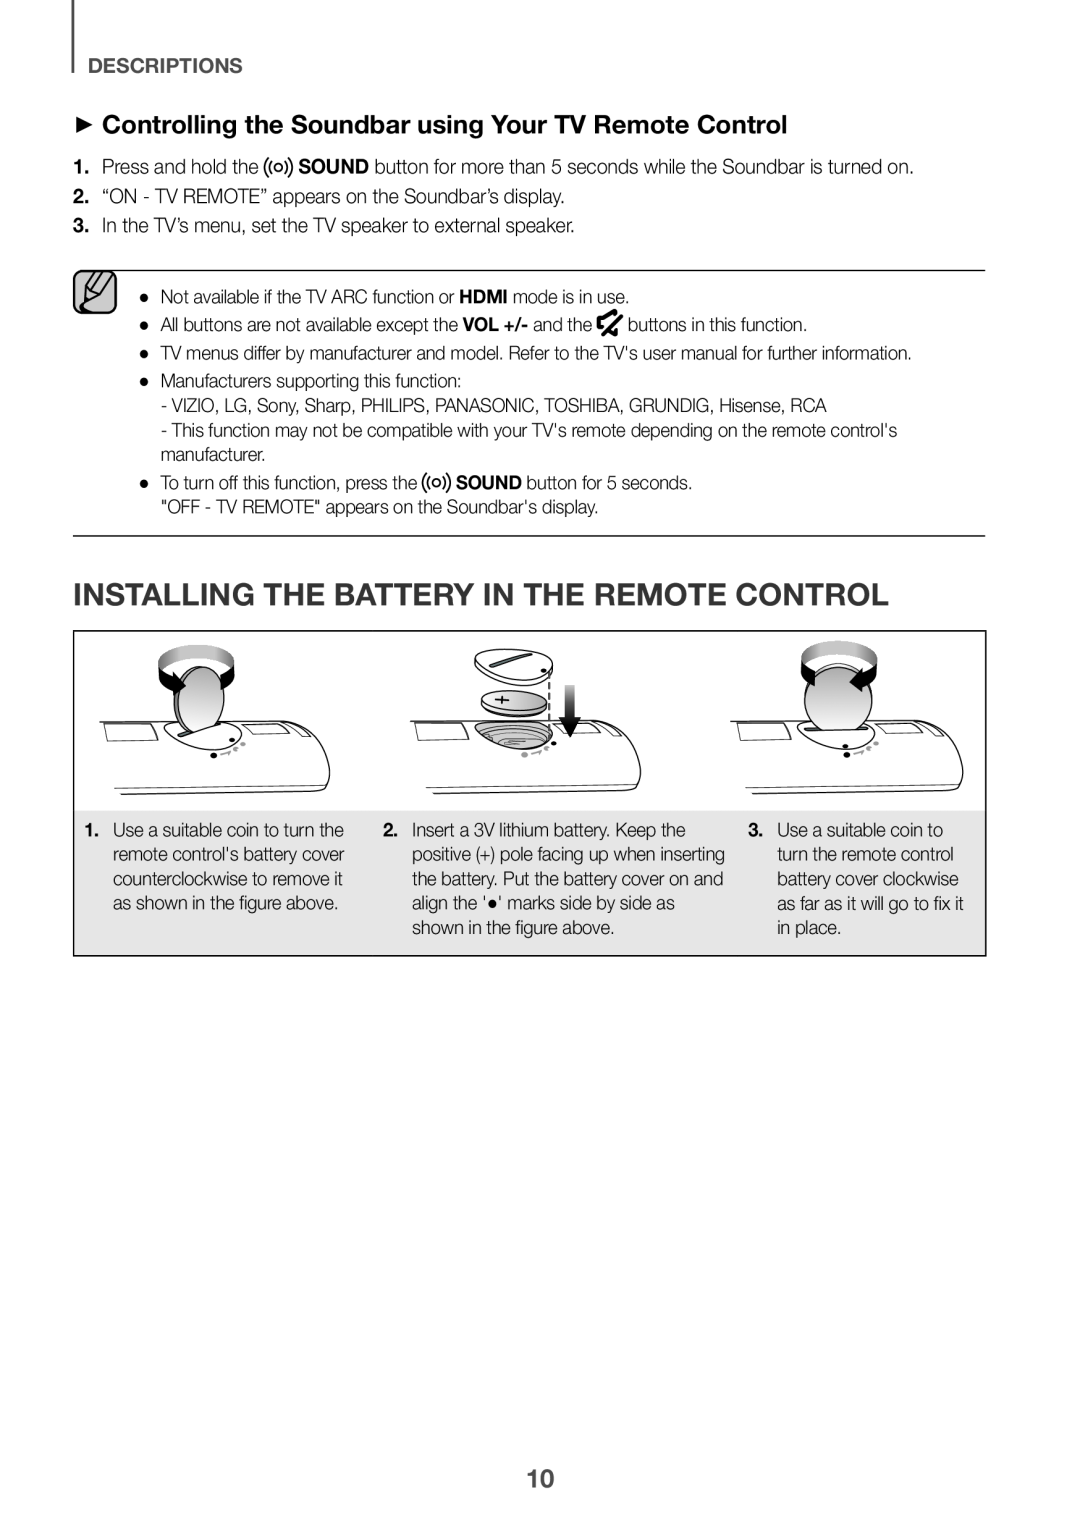 Samsung HW-K651/ZF Installing the Battery in the Remote Control, ++Controlling the Soundbar using Your TV Remote Control 